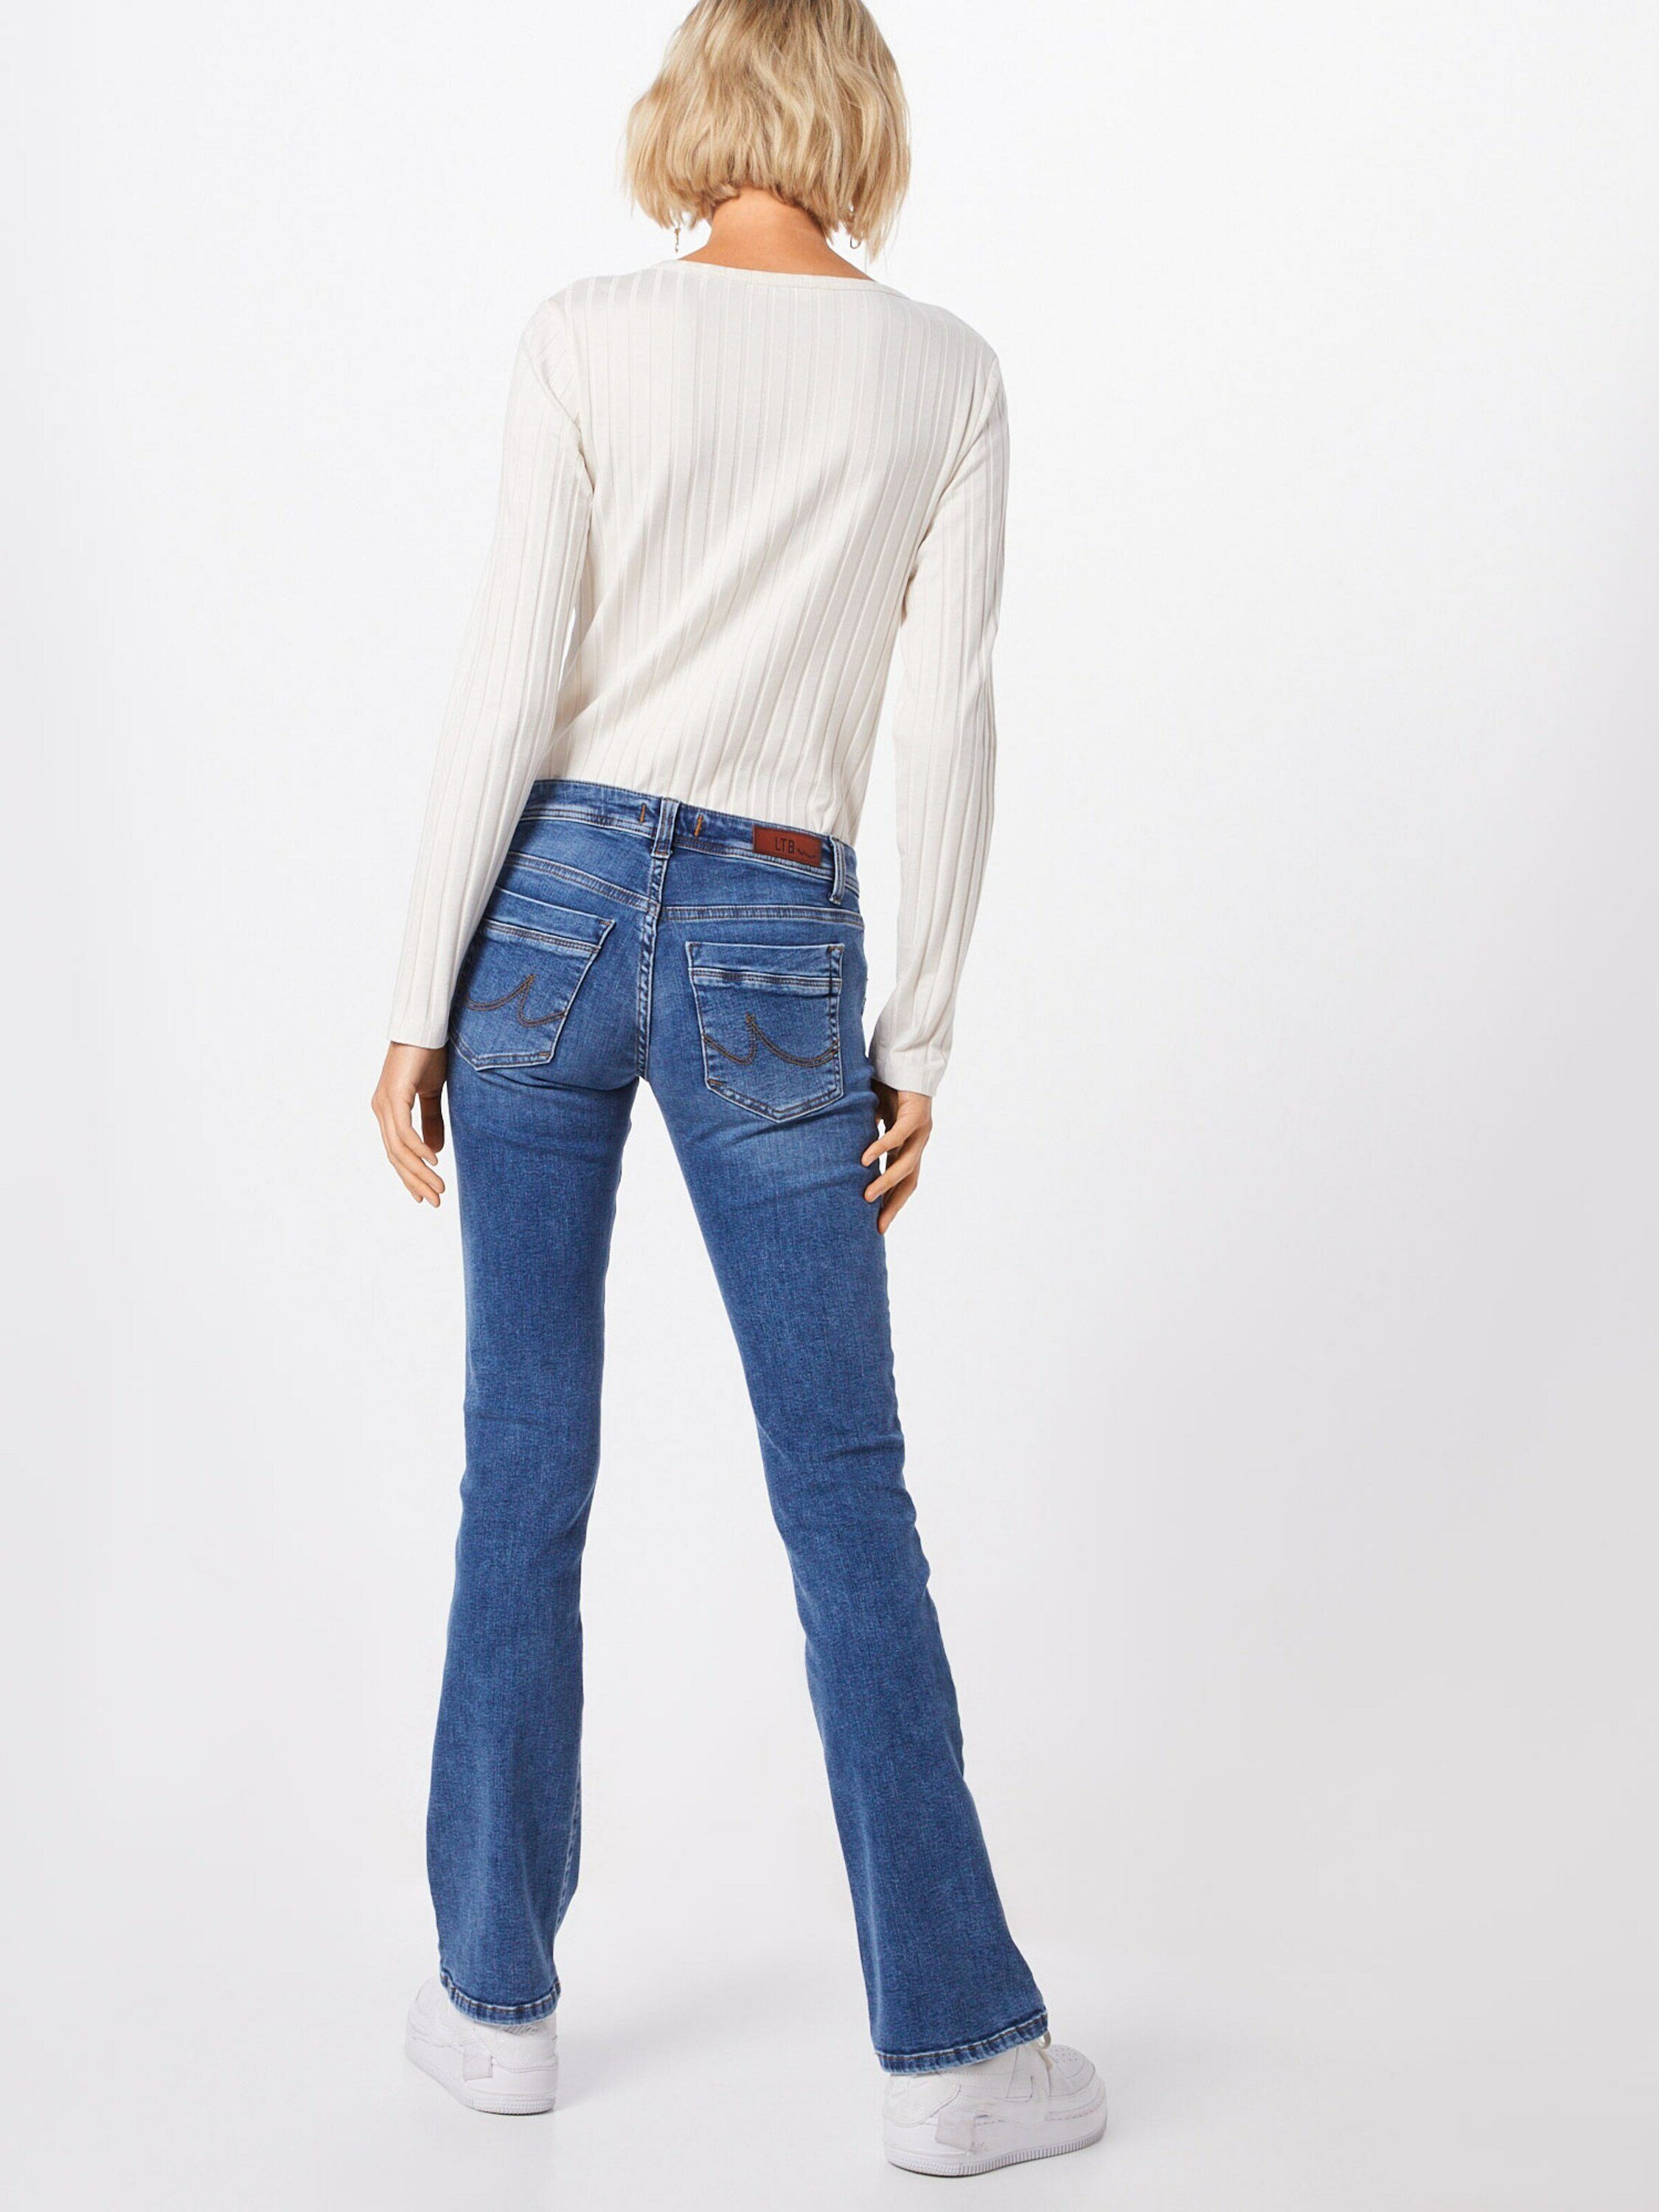 Plain/ohne Details, Weiteres (1-tlg) Detail, LTB Bootcut-Jeans Cut-Outs Valerie